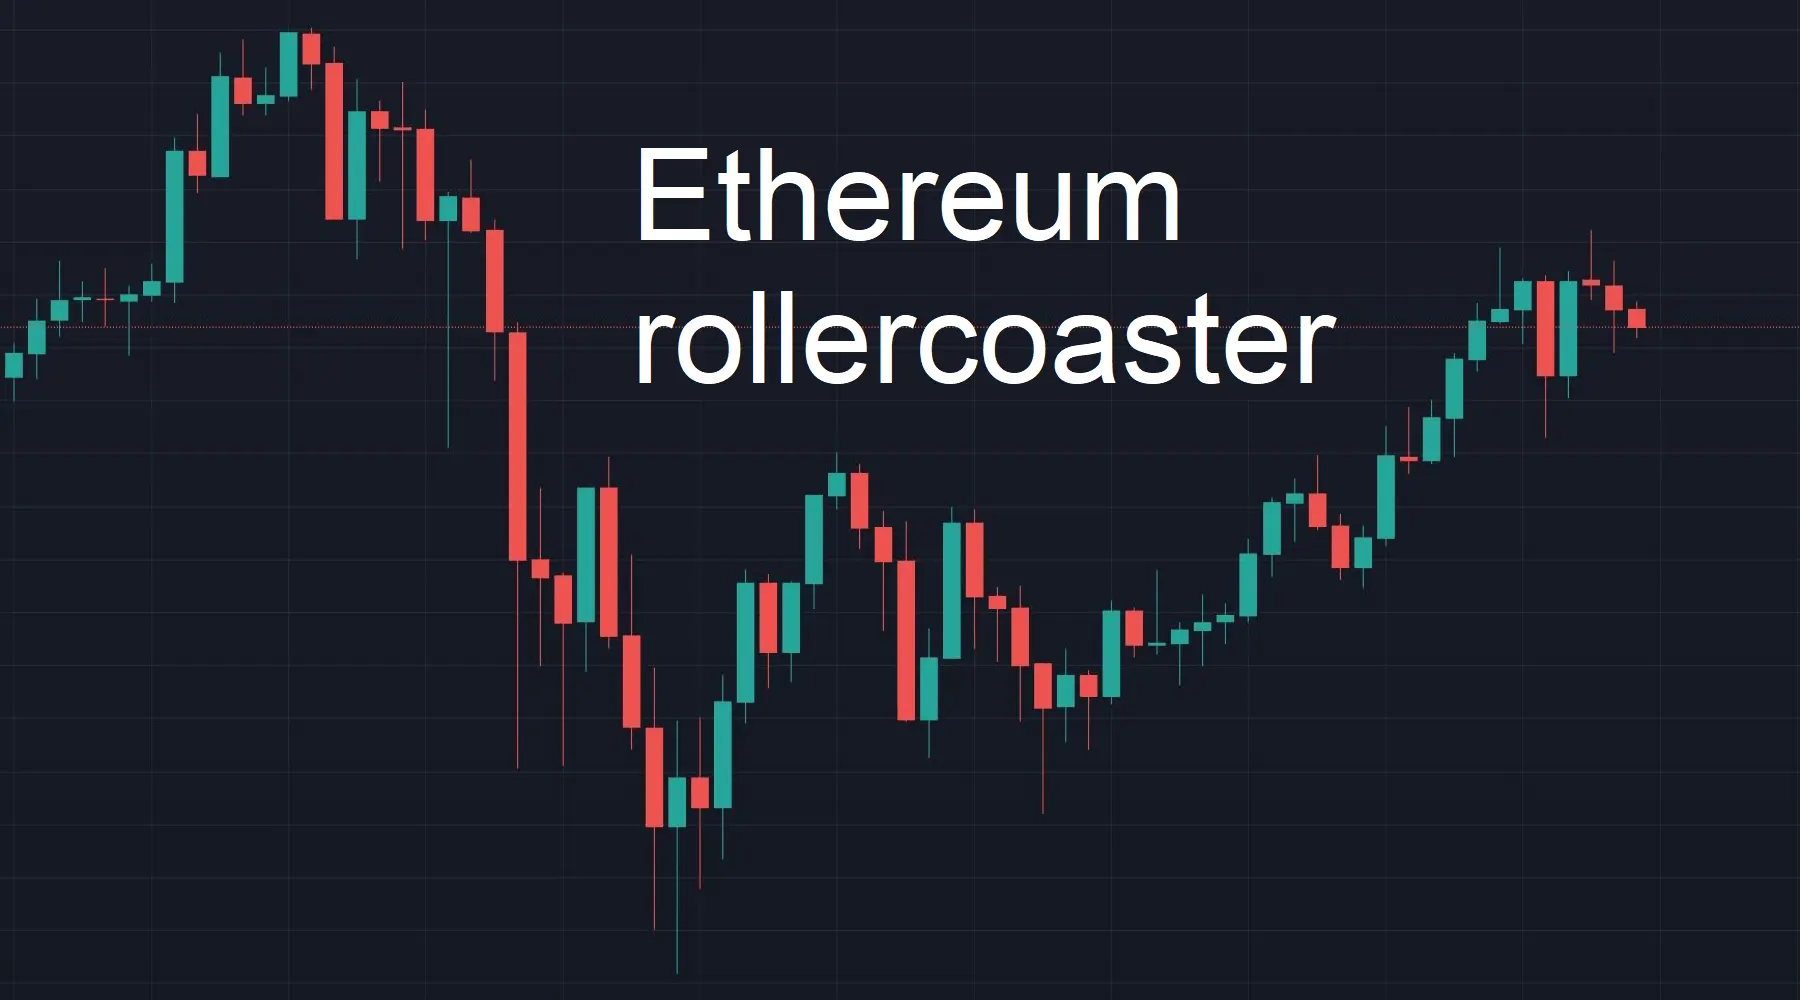 Ethereum price: Upward surge noted but fears of near-term volatility continue to persist